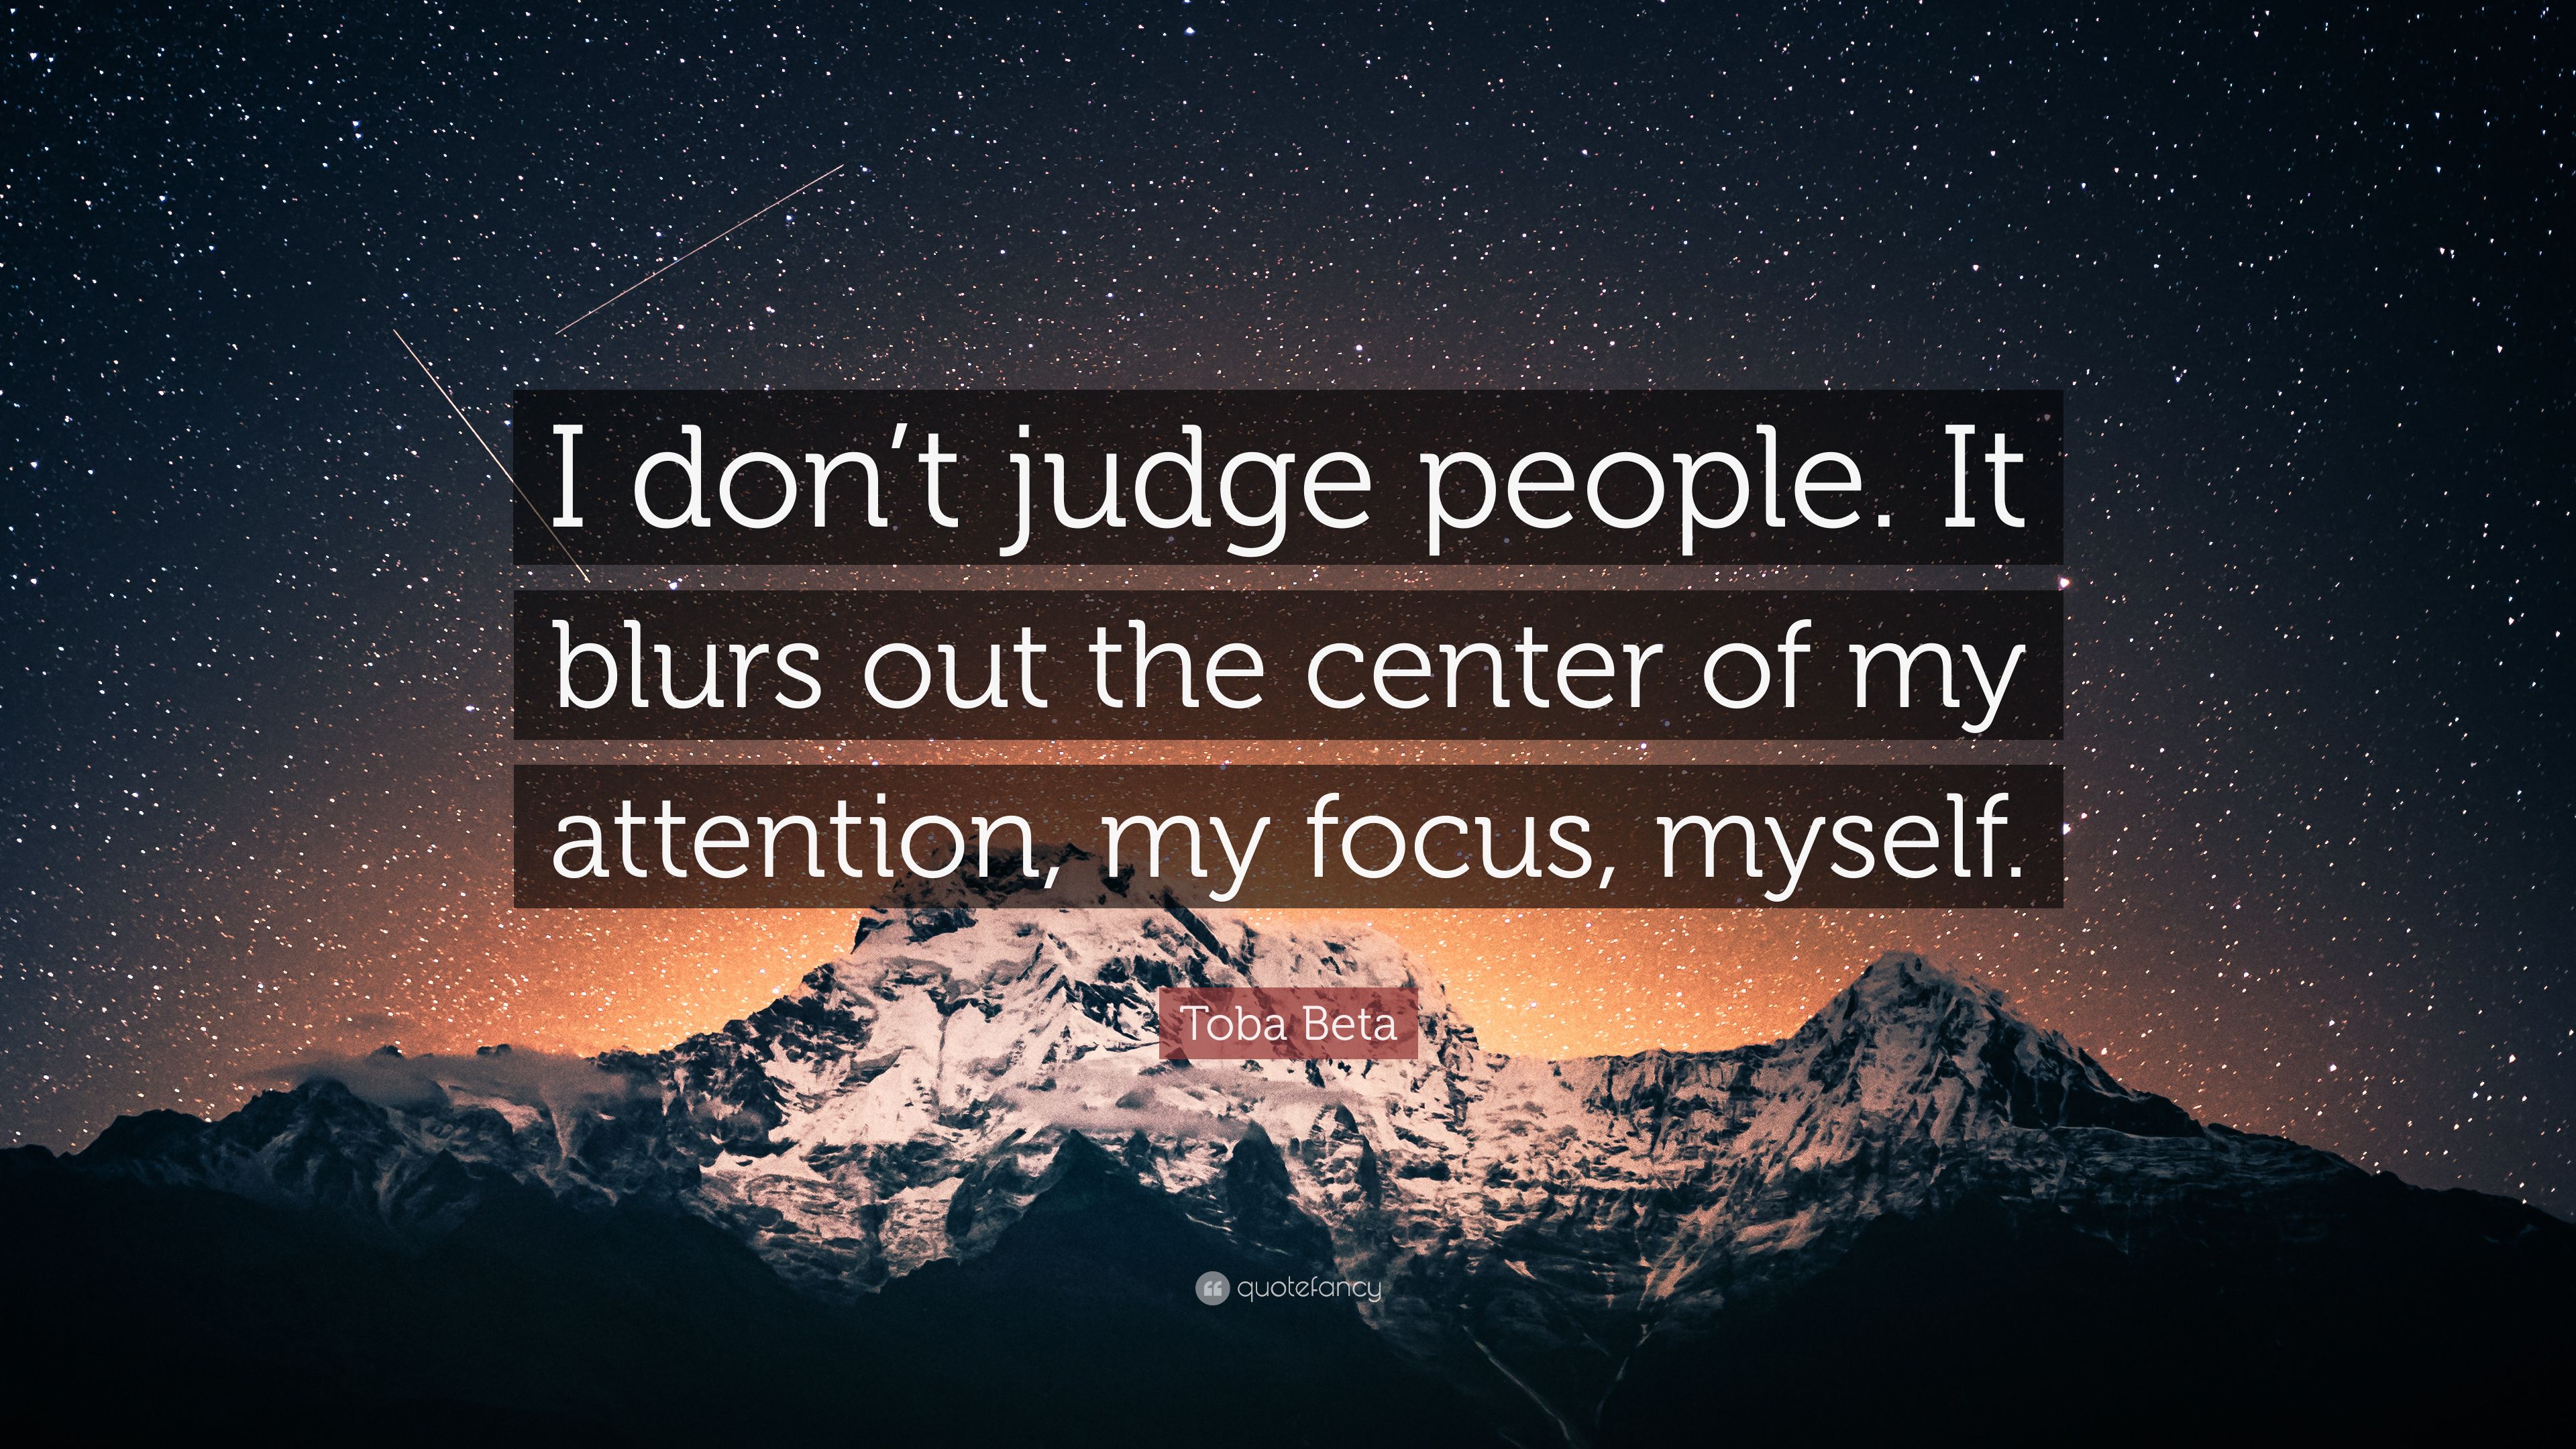 Toba Beta Quote: “I don't judge people. It blurs out the center